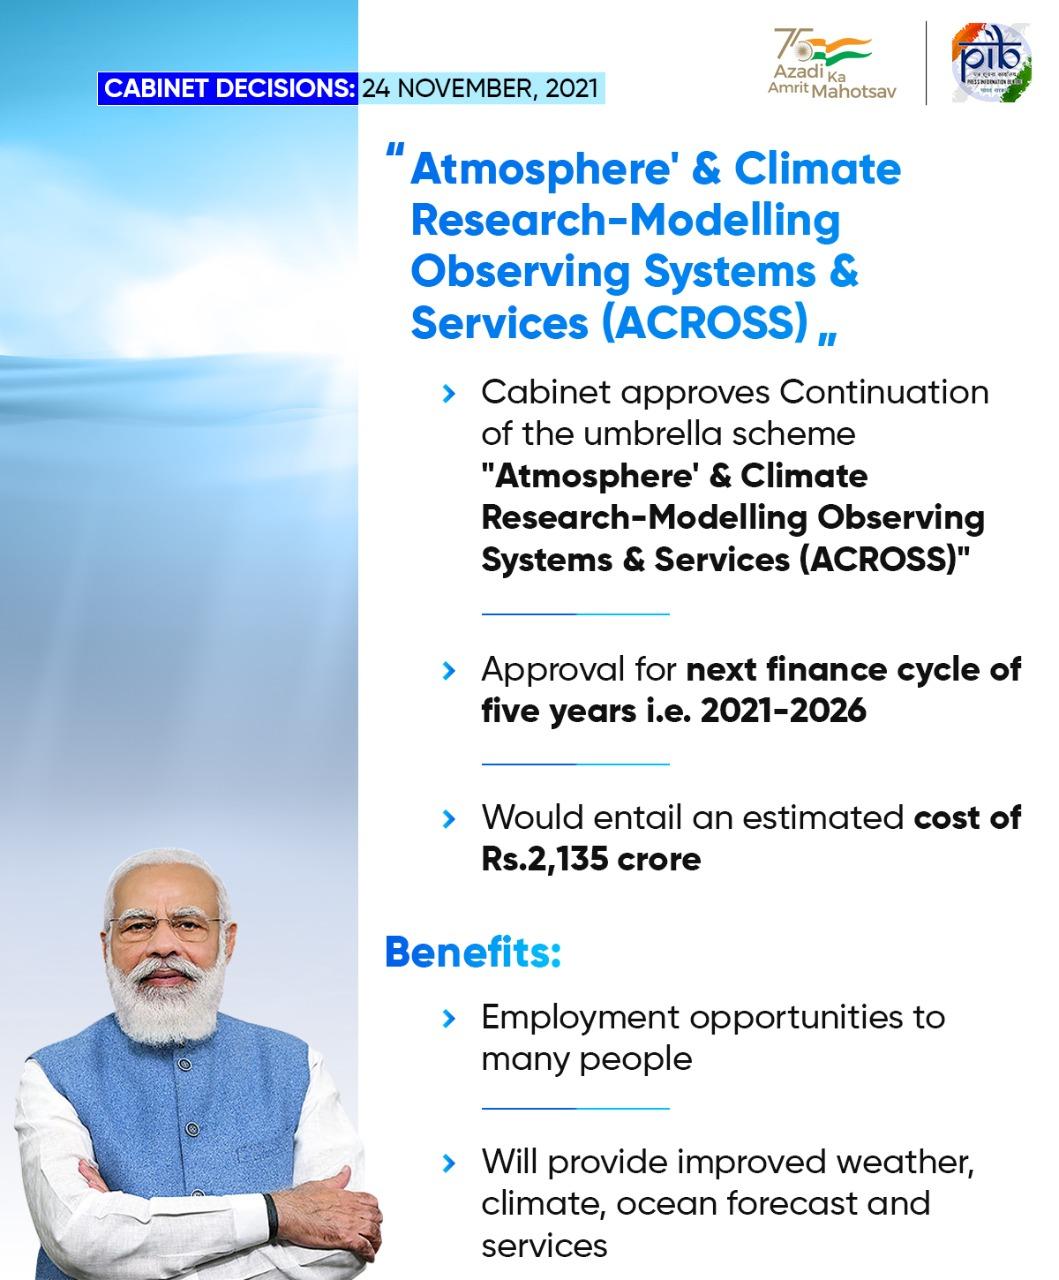 Atmosphere & Climate Research-Modelling Observing Systems & Services (ACROSS) umbrella scheme_40.1